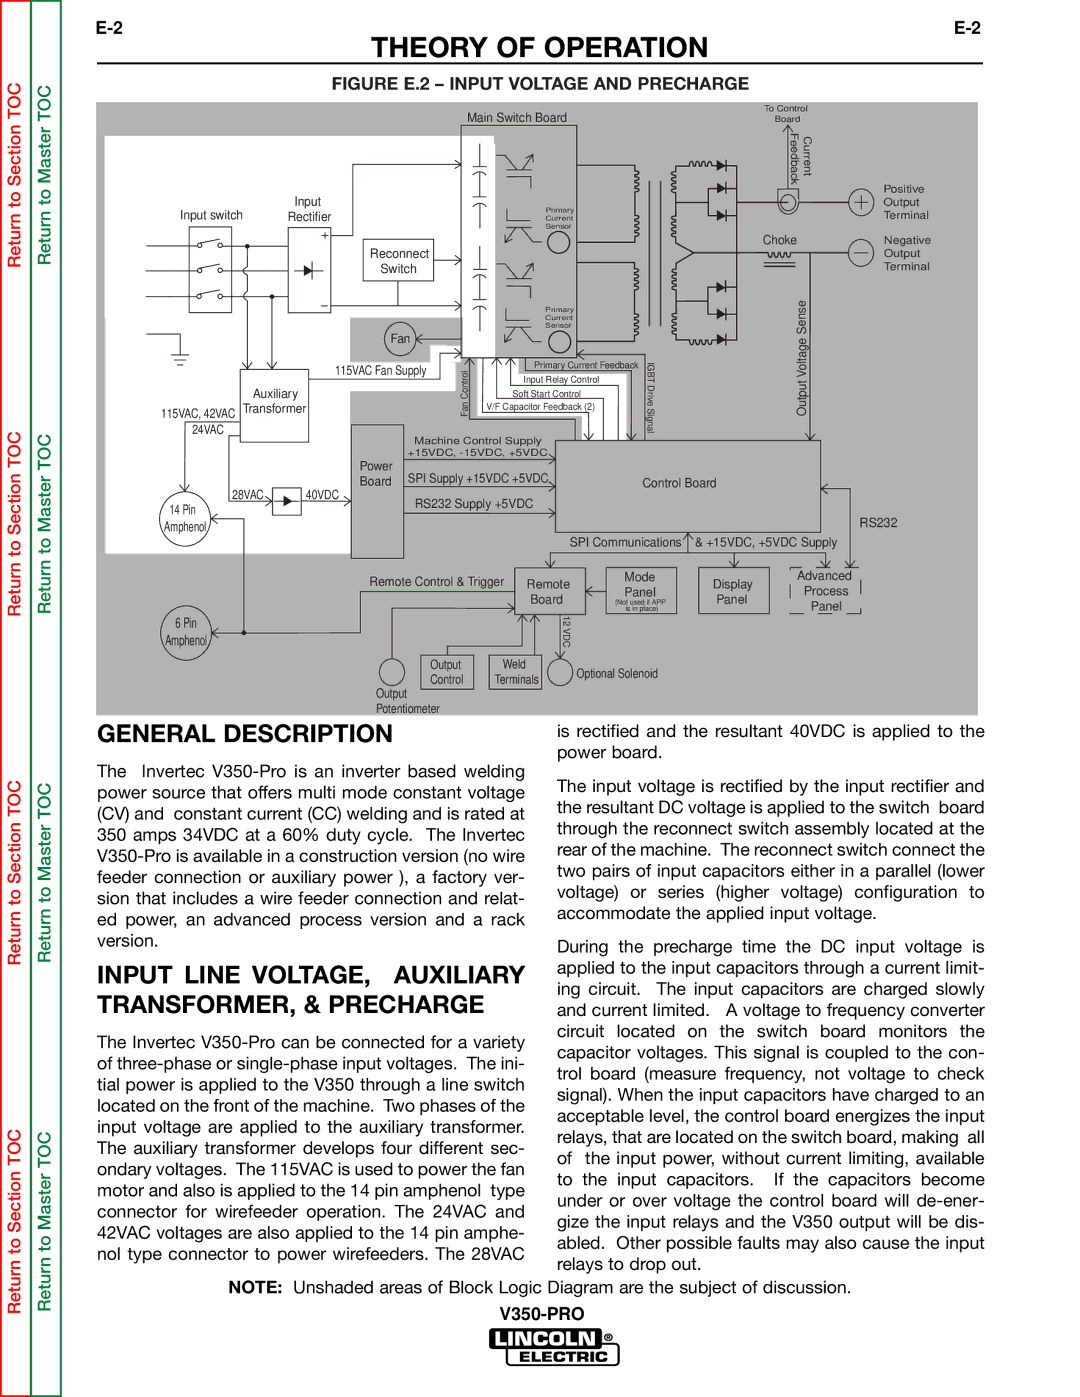 Lincoln Electric SVM158-A service manual Theory of Operation 